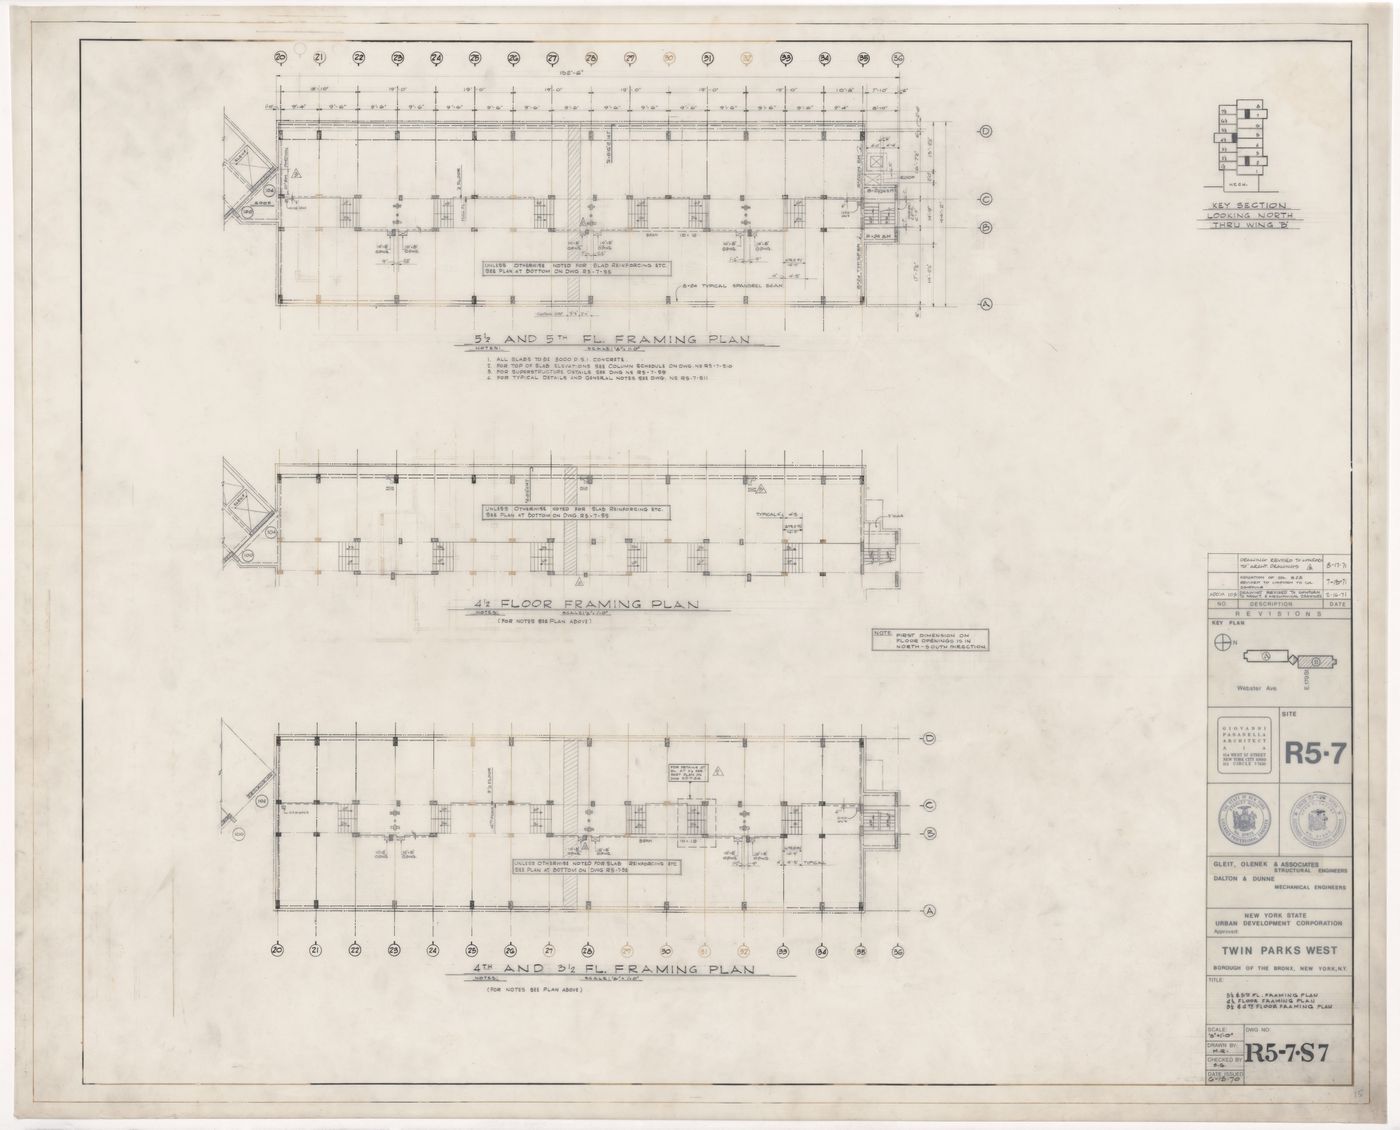 Framing plans for Twin Parks West, Site R5-7, Bronx, New York